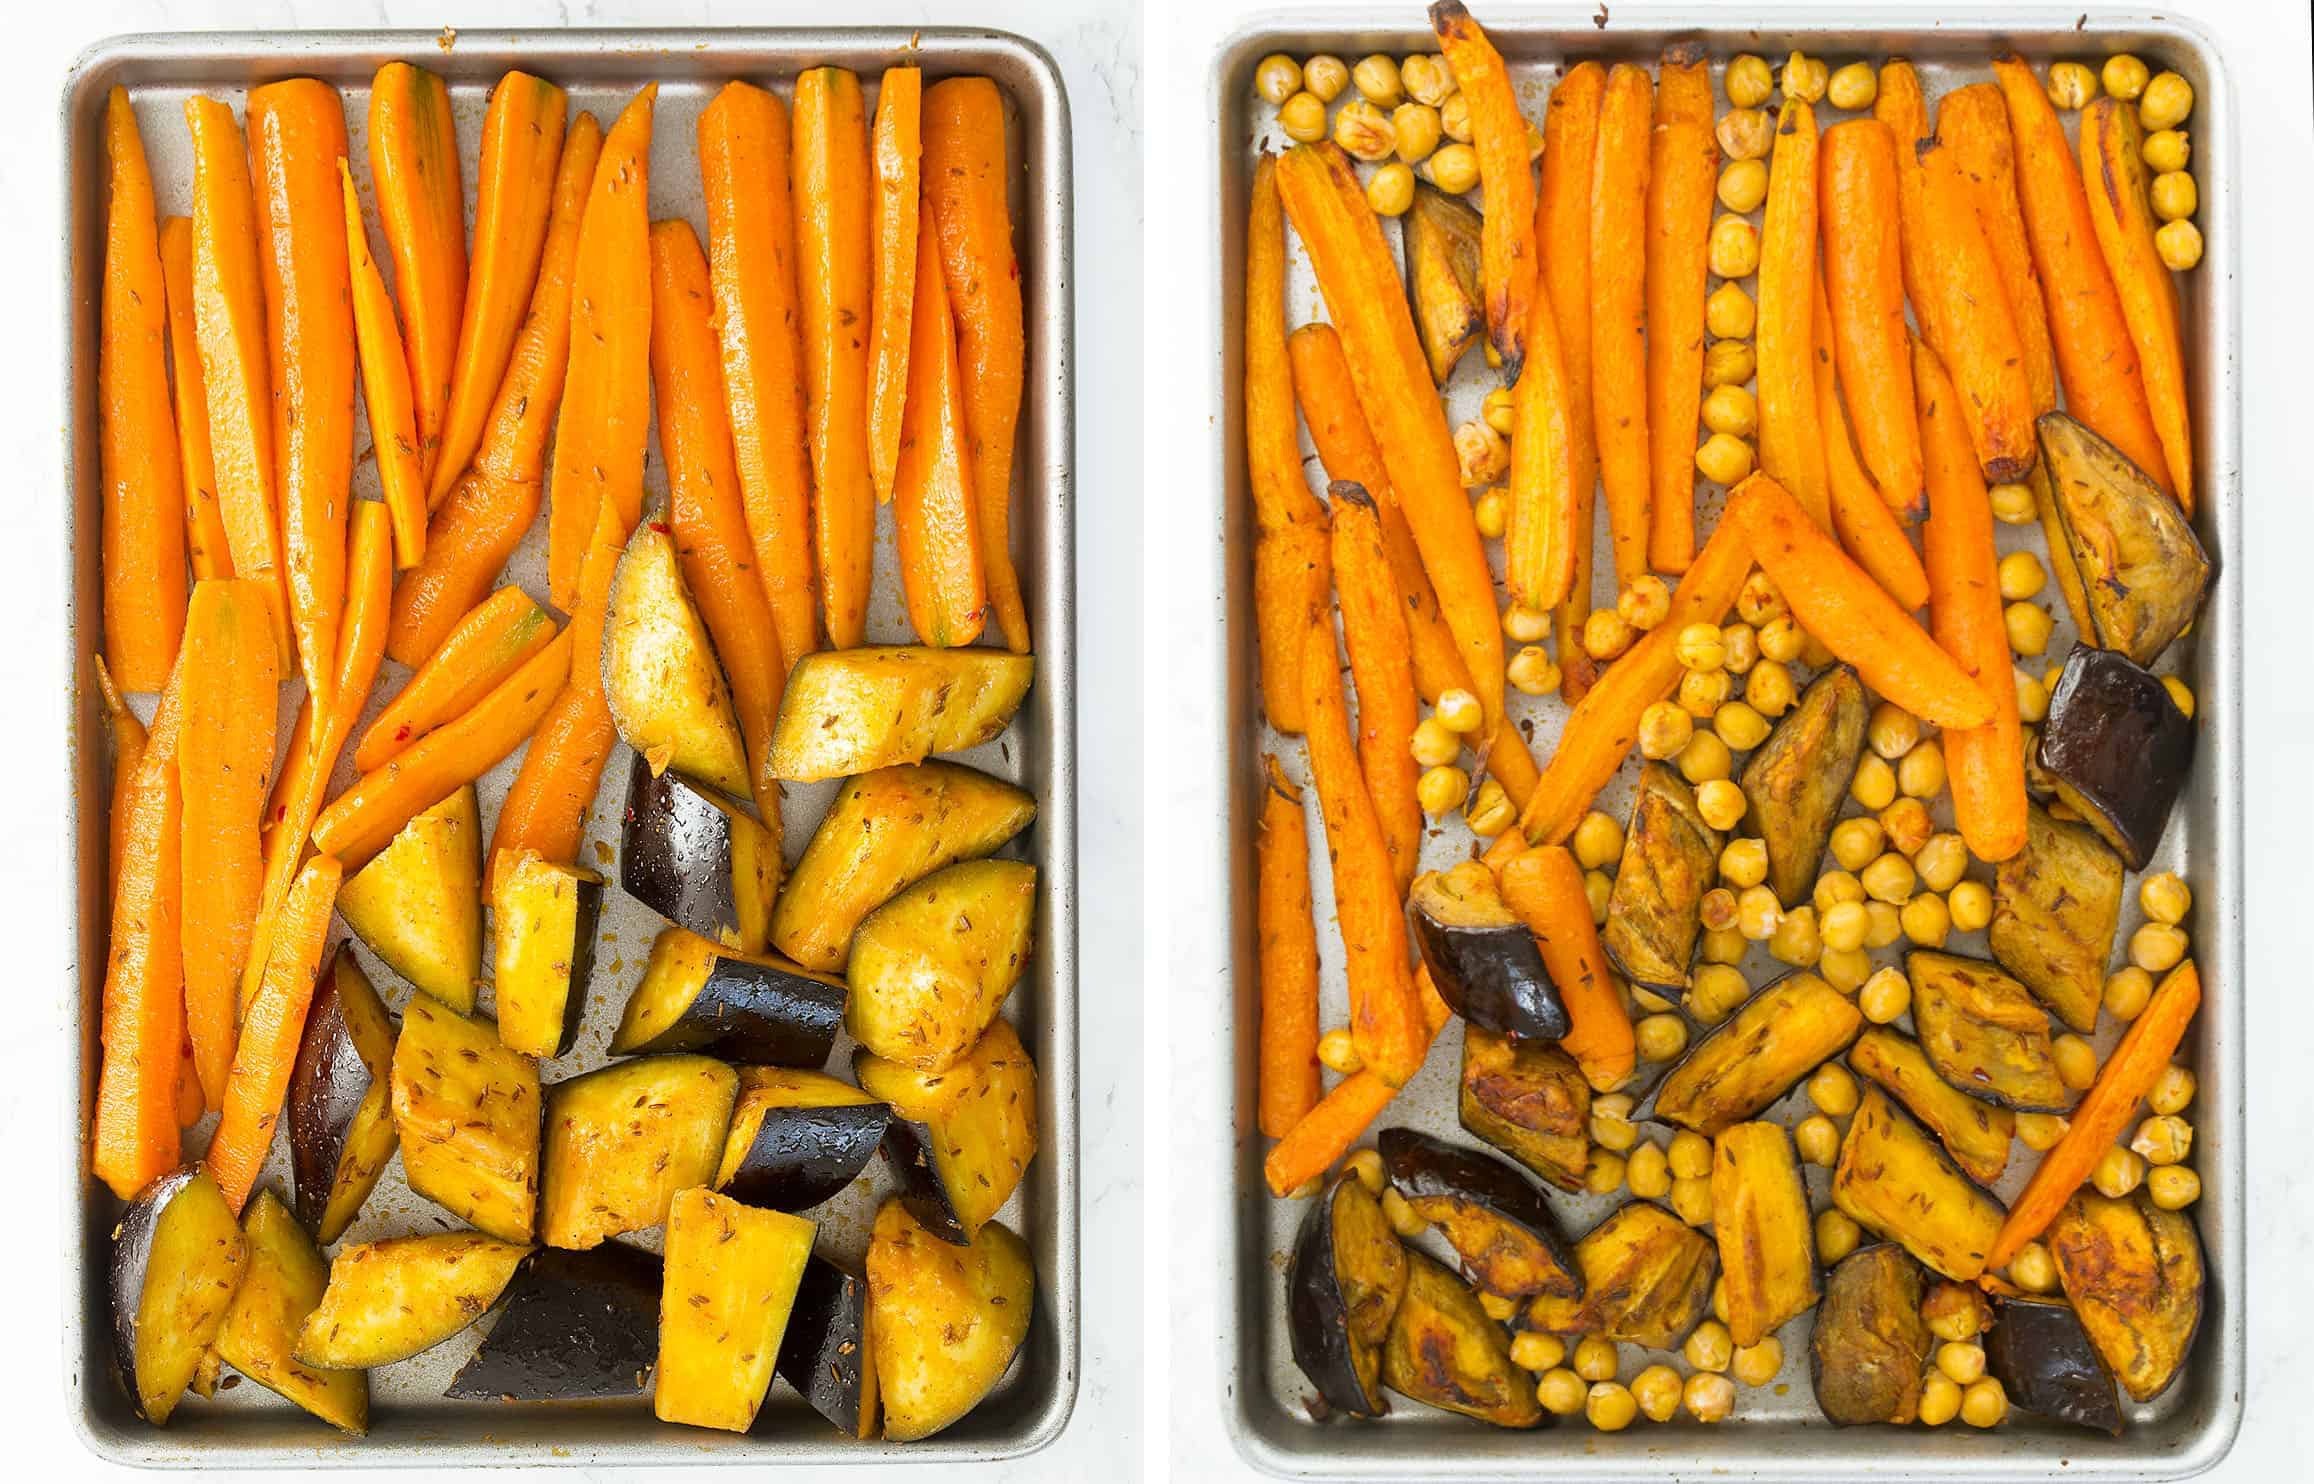 The ingredients for the harissa eggplant and carrot salad are arranged on a baking tray.